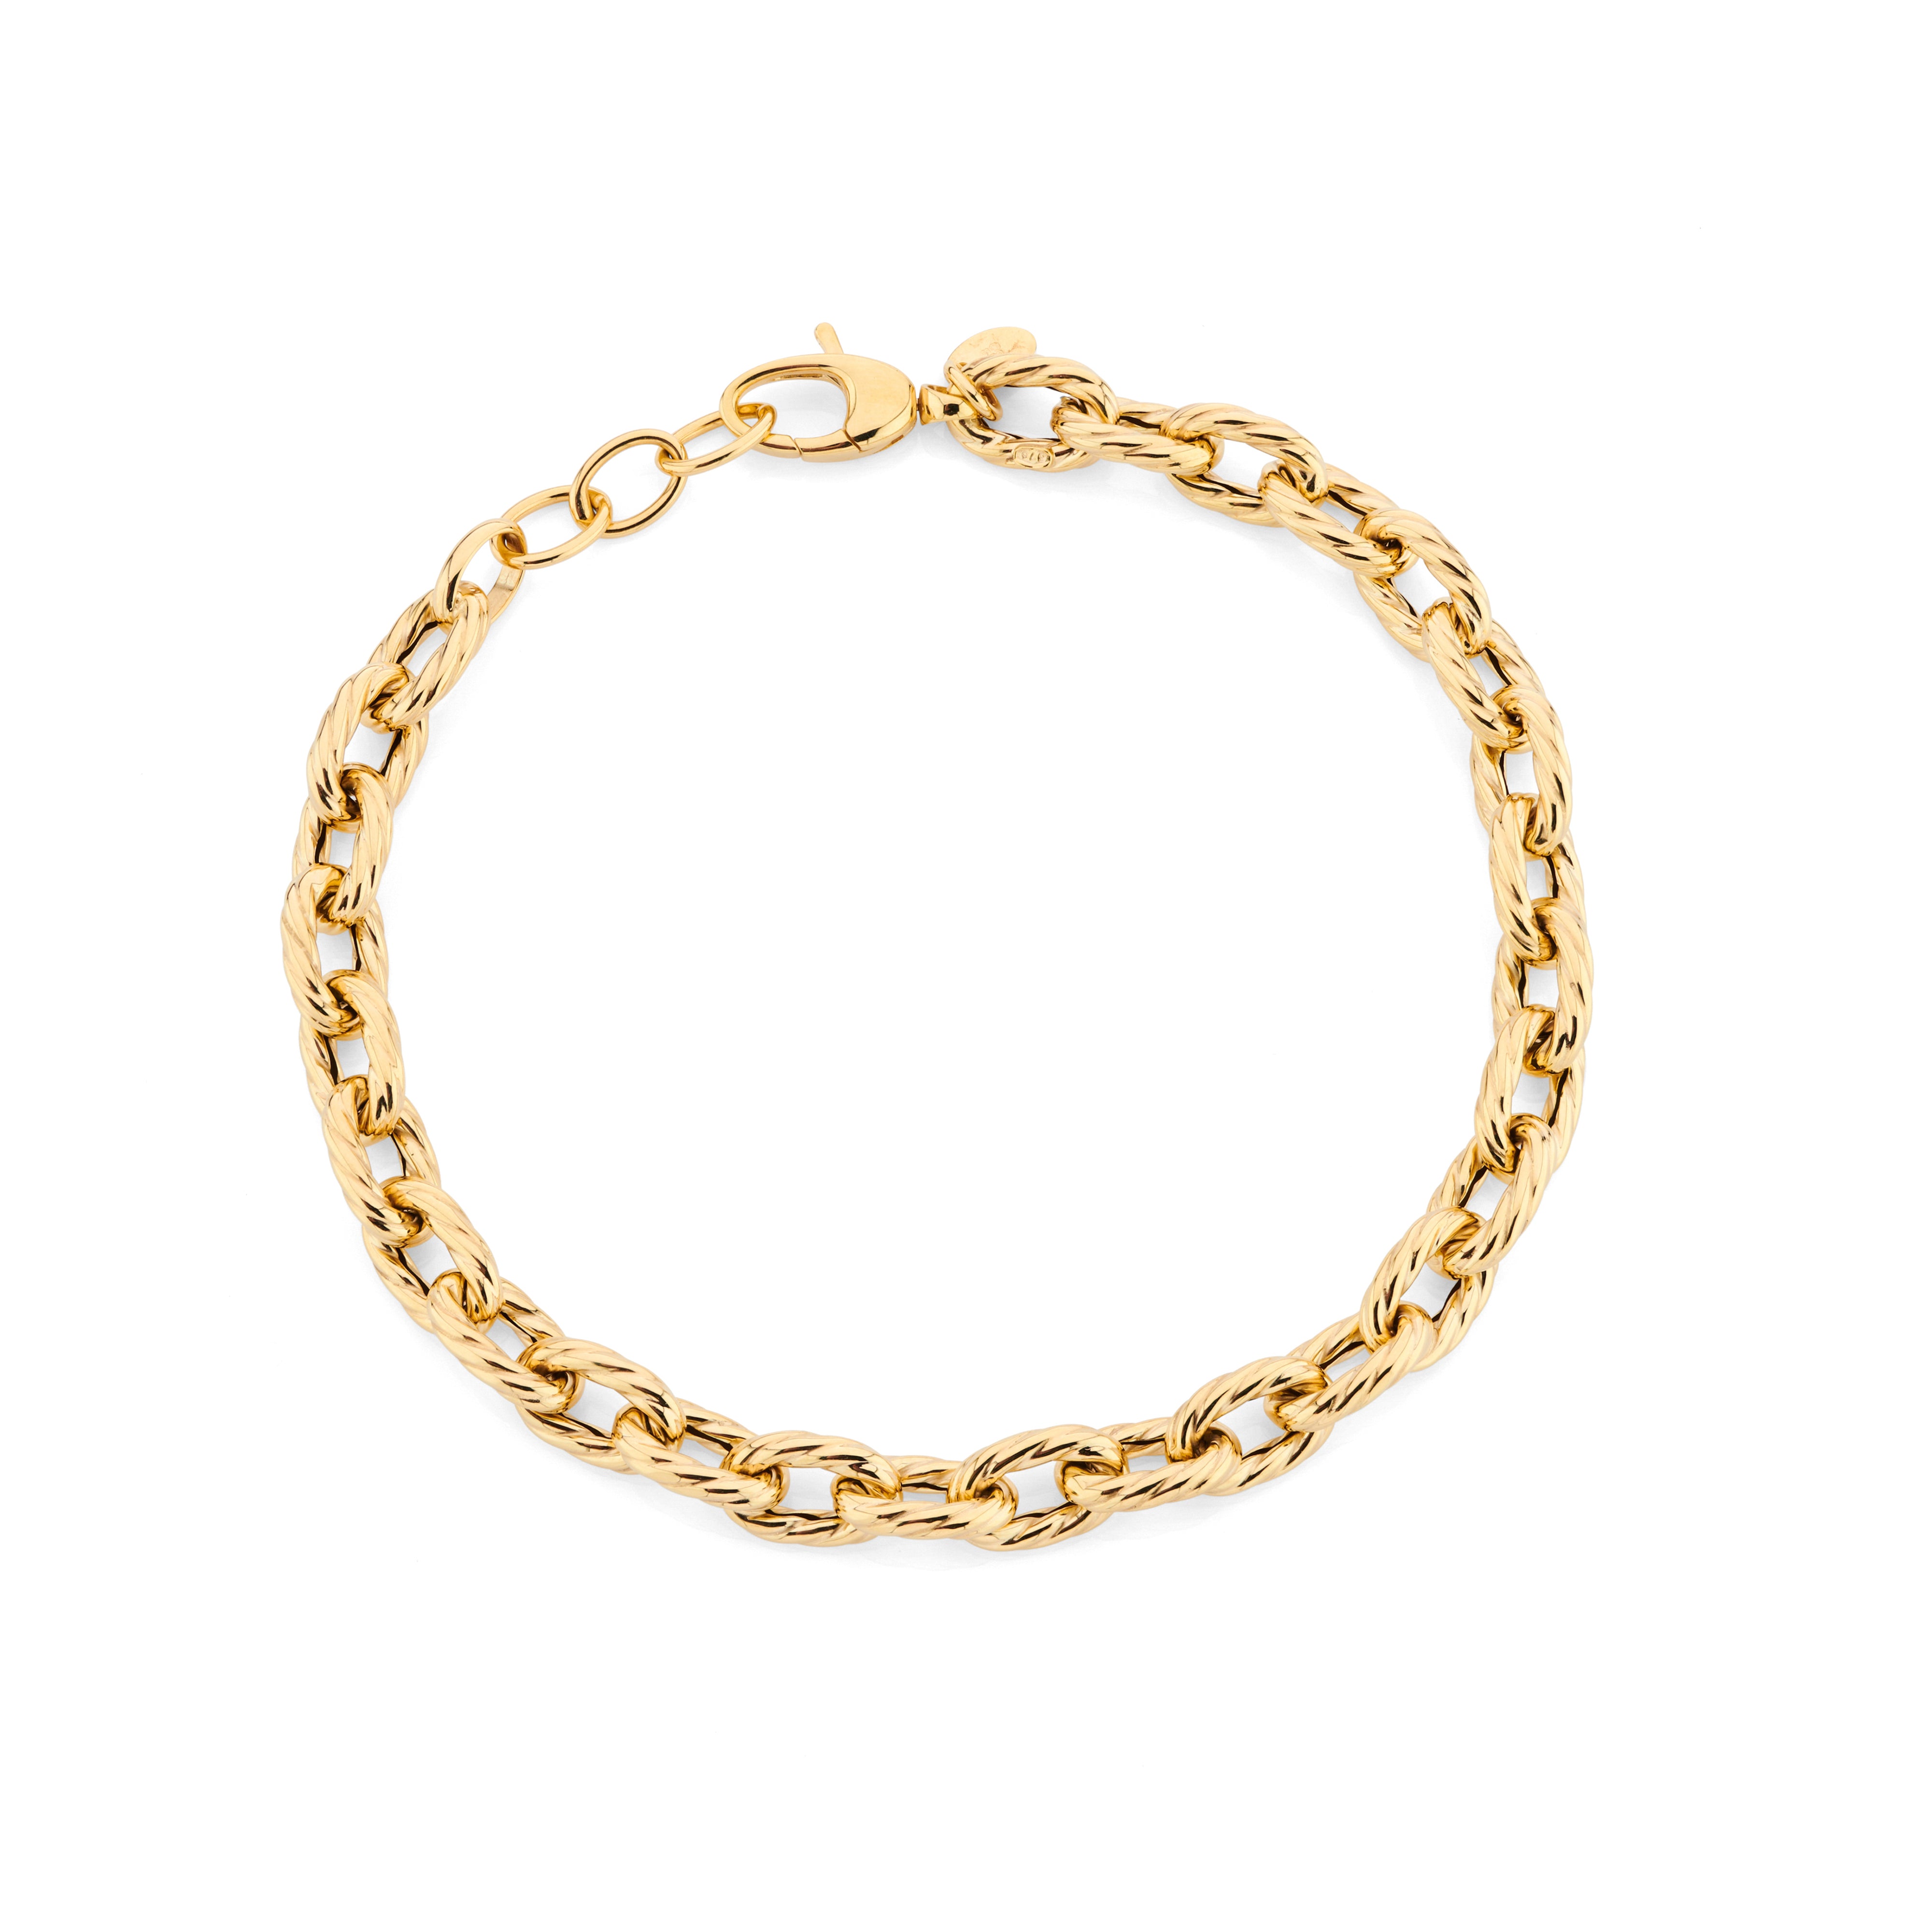 YELLOW GOLD ROPE LINK BRACELET